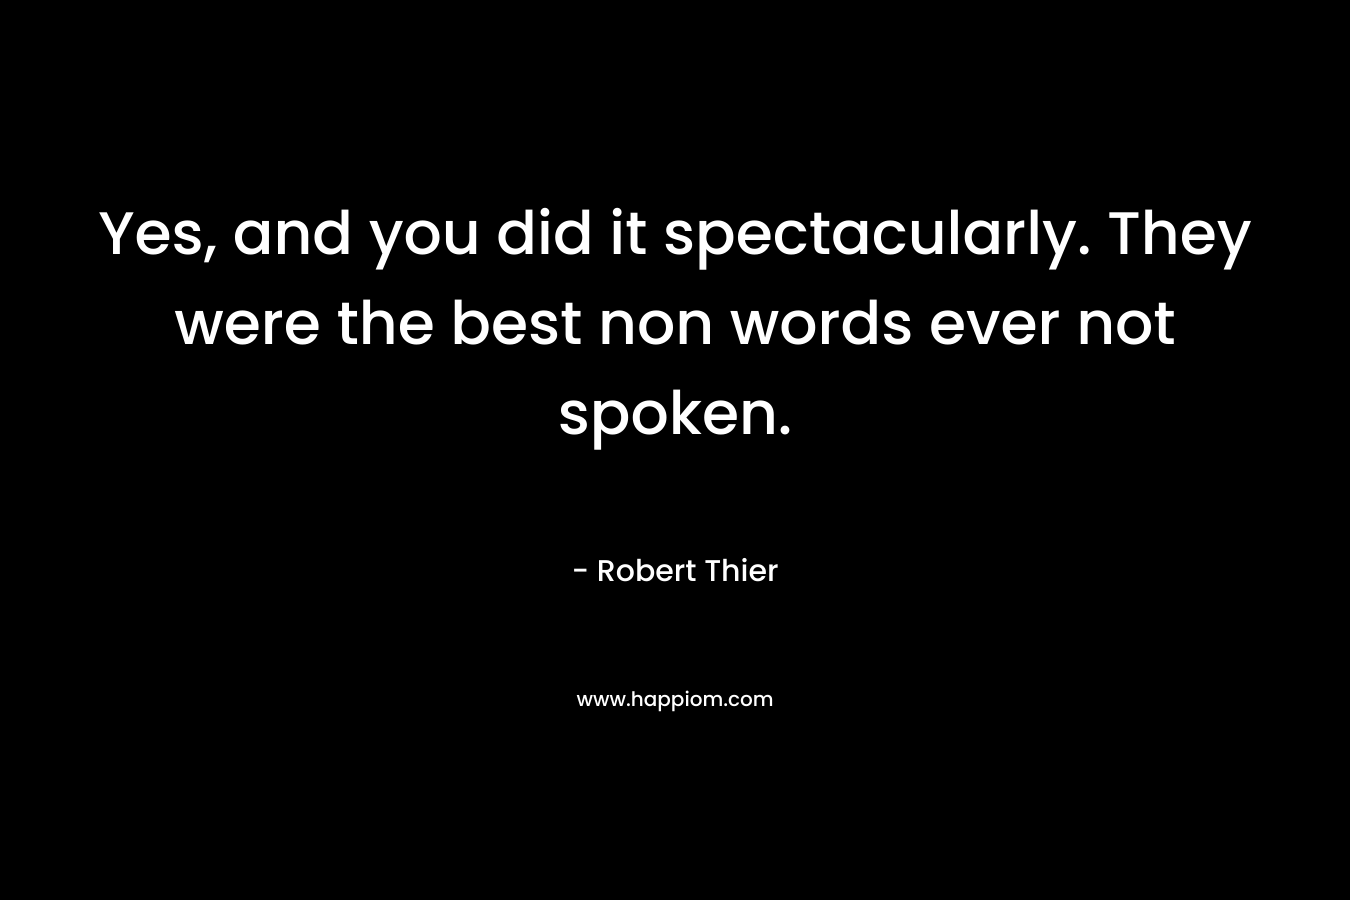 Yes, and you did it spectacularly. They were the best non words ever not spoken.